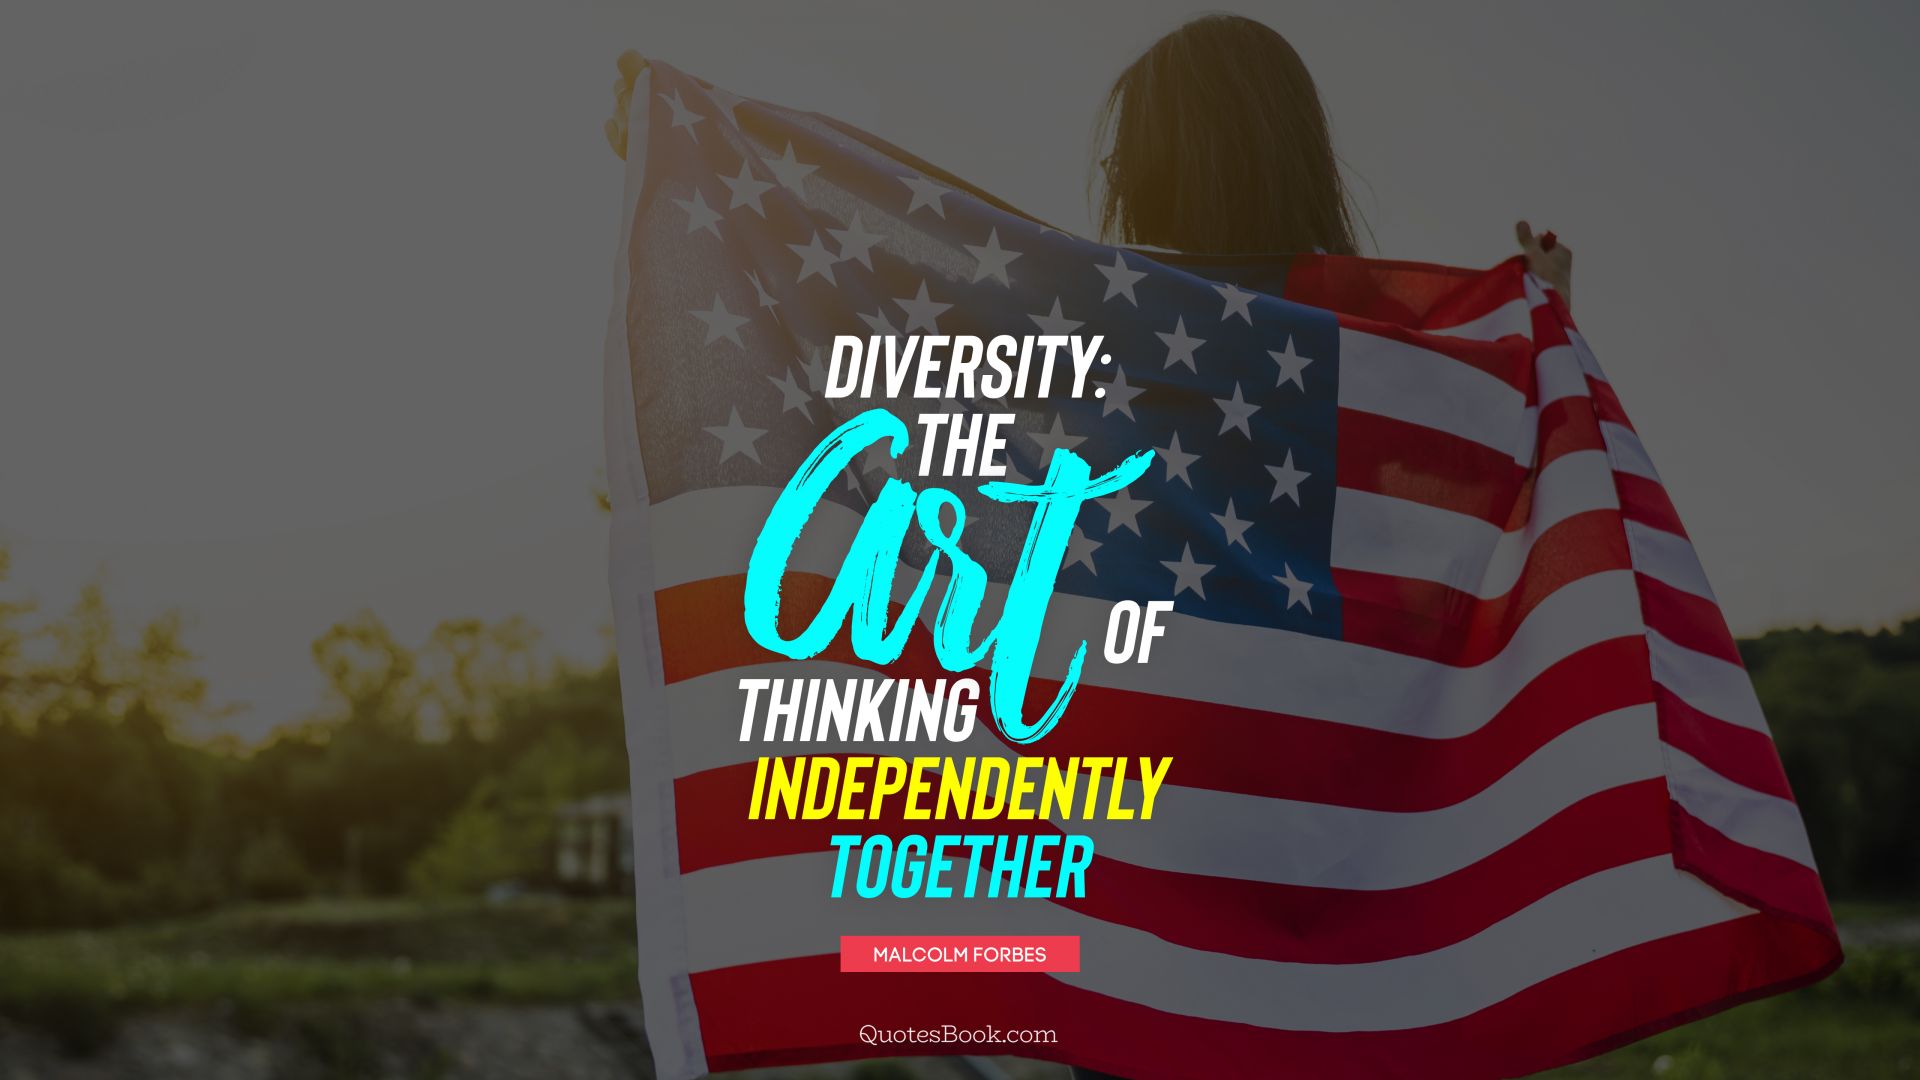 Diversity: the art of thinking independently together. - Quote by Malcolm Forbes